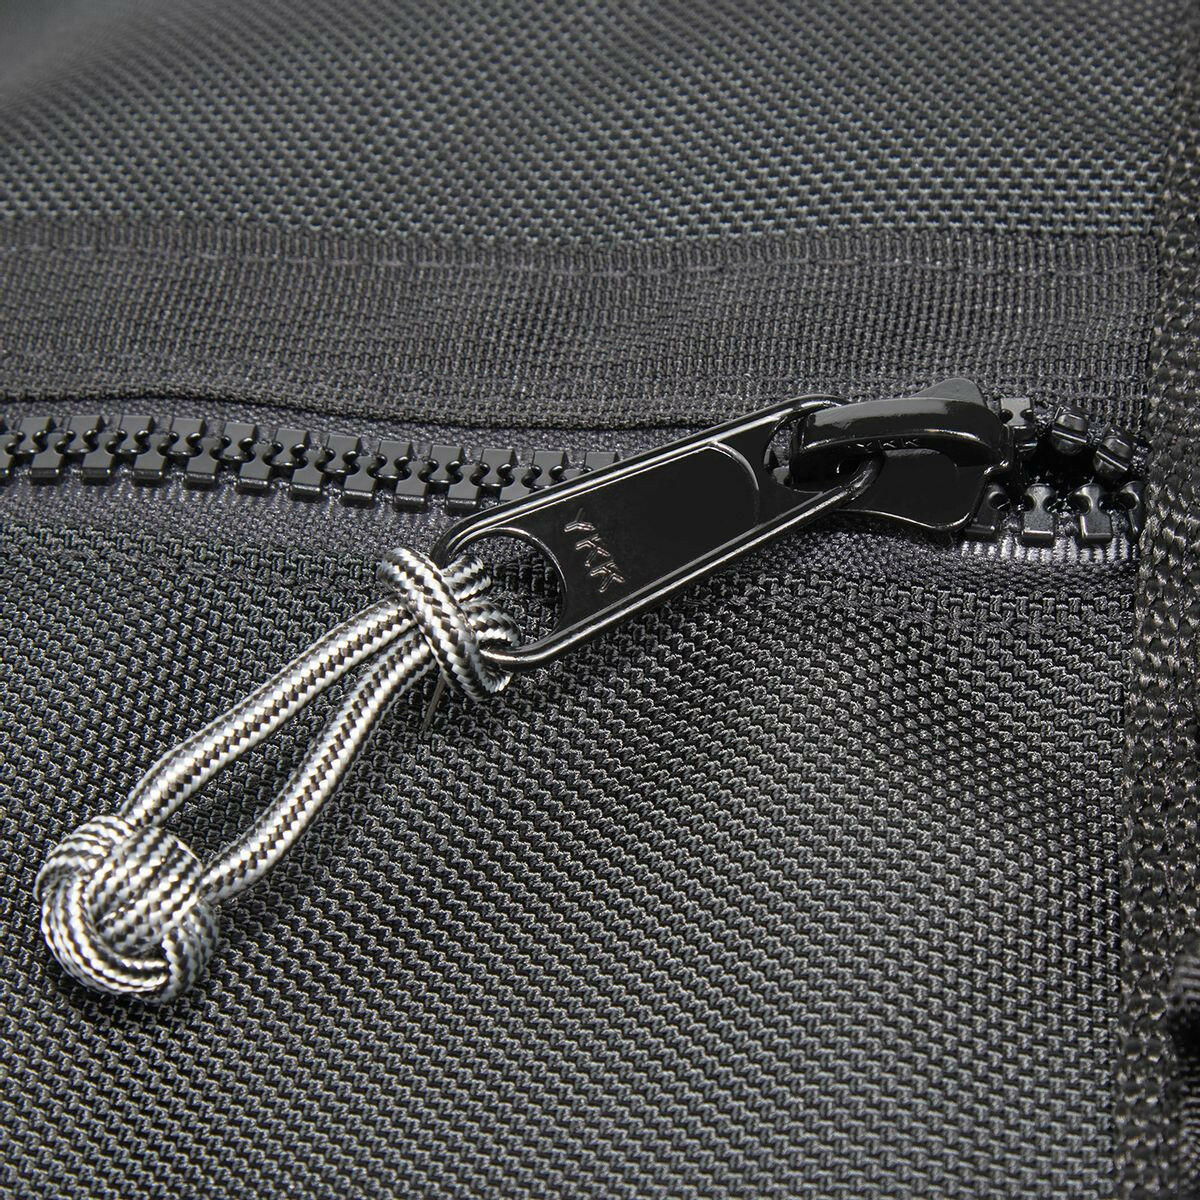 close up of YKK zipper slider with monkey fist zip knot attached